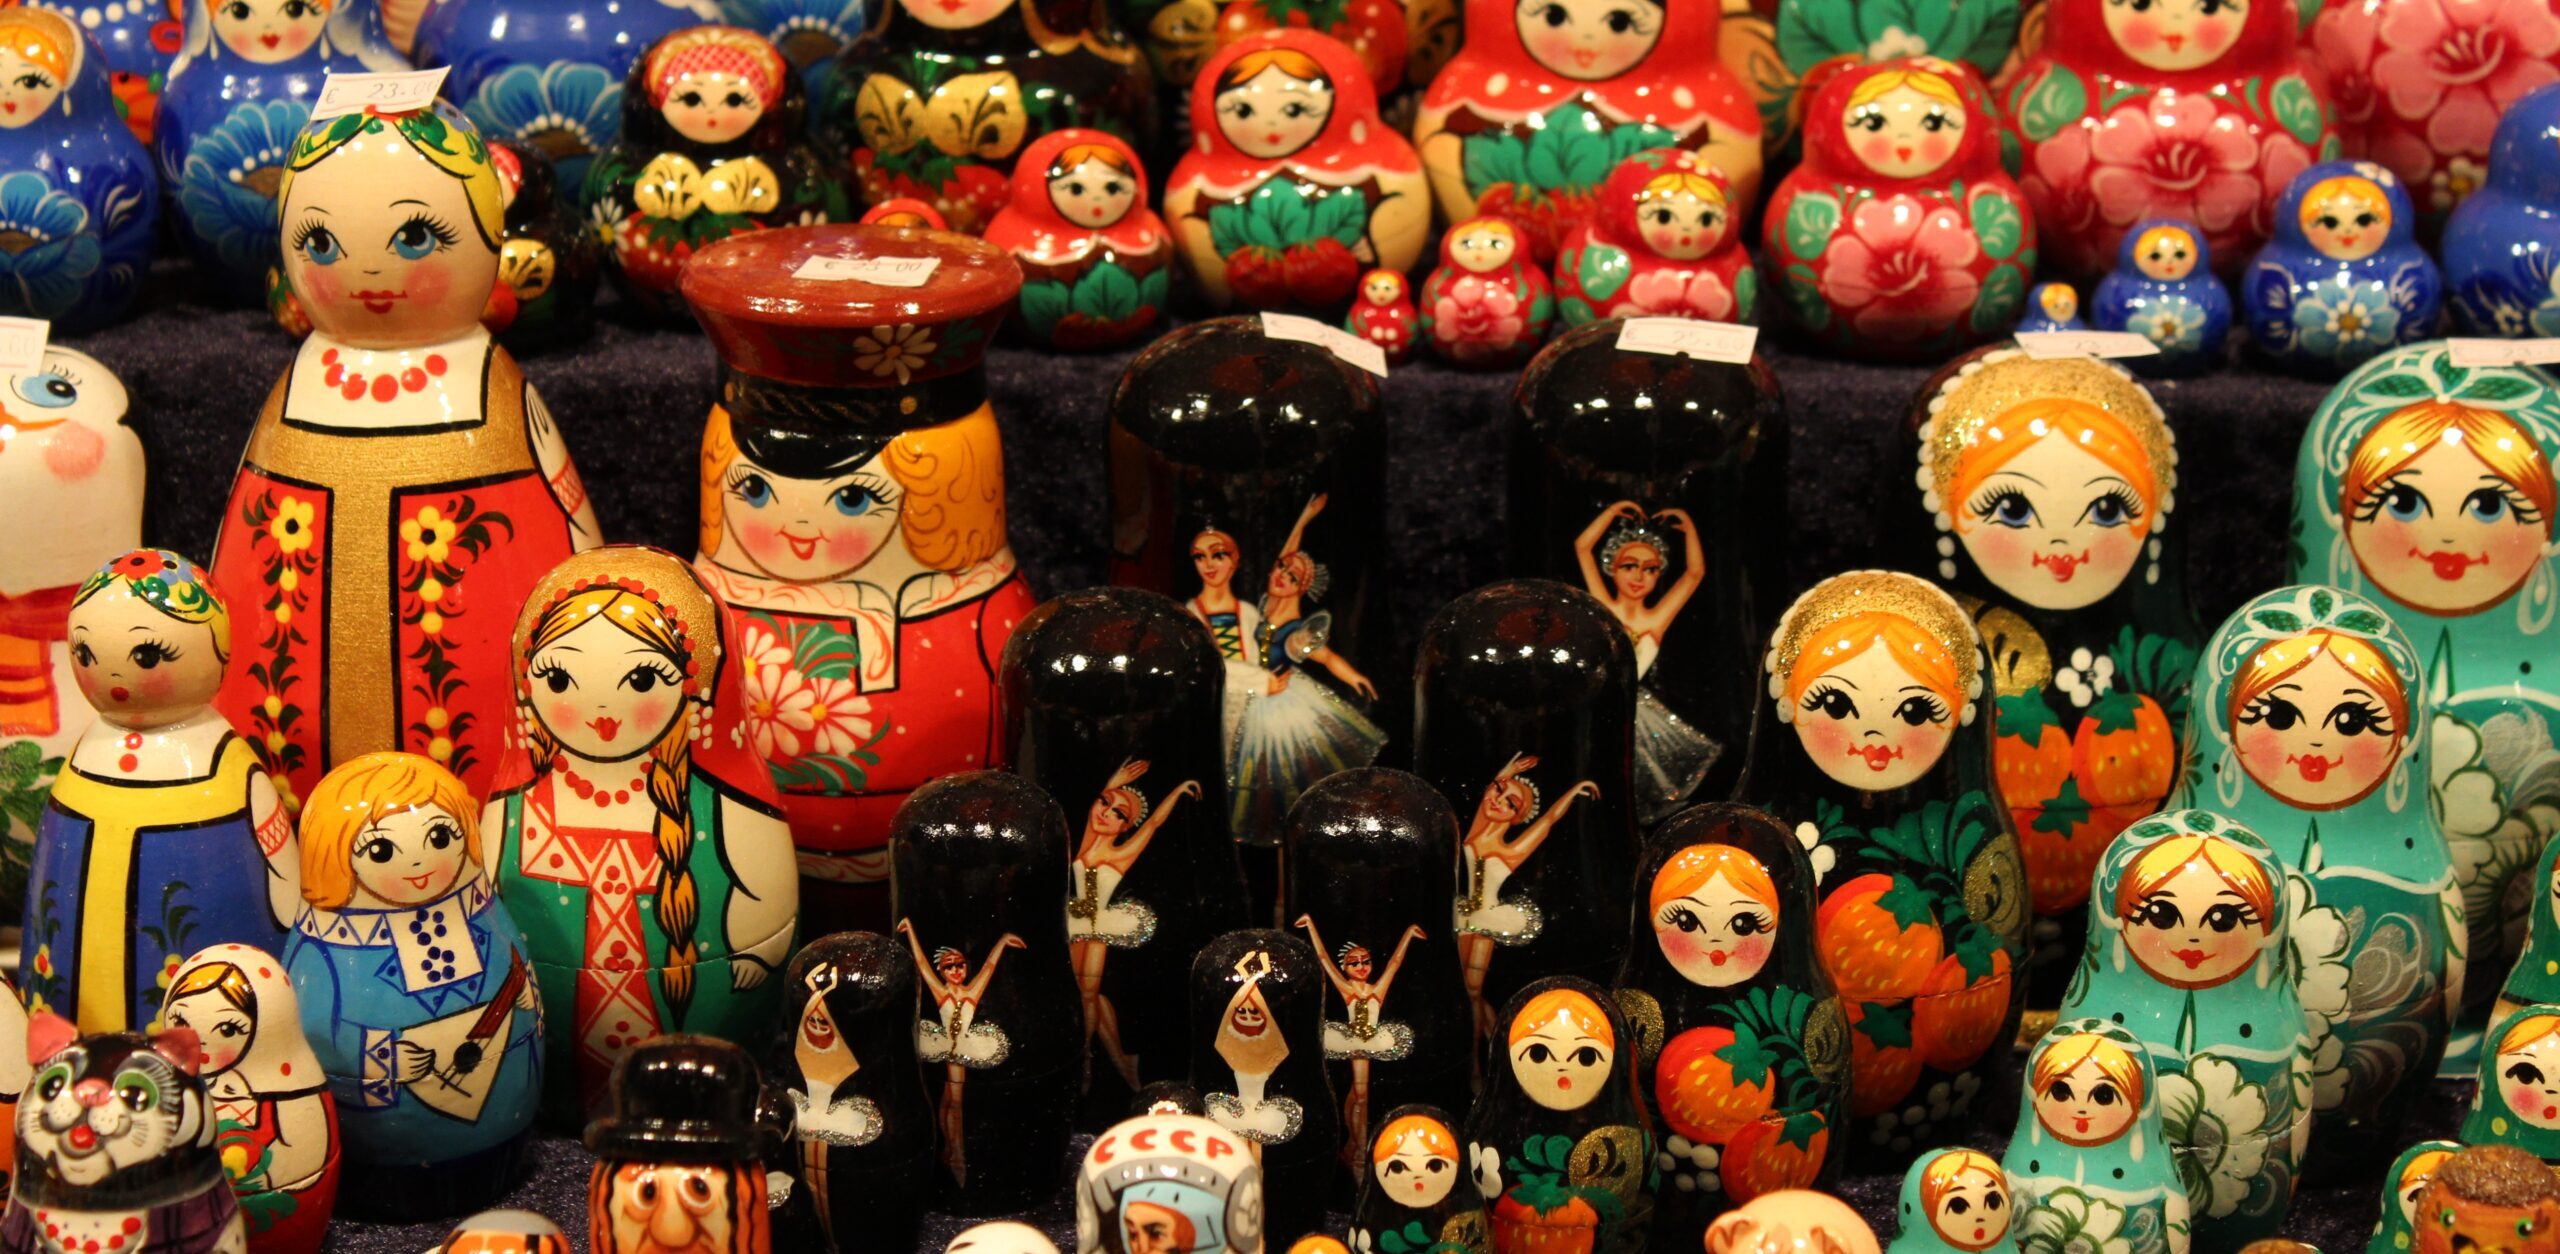 Rows of colorful Russian nesting dolls of different sizes.